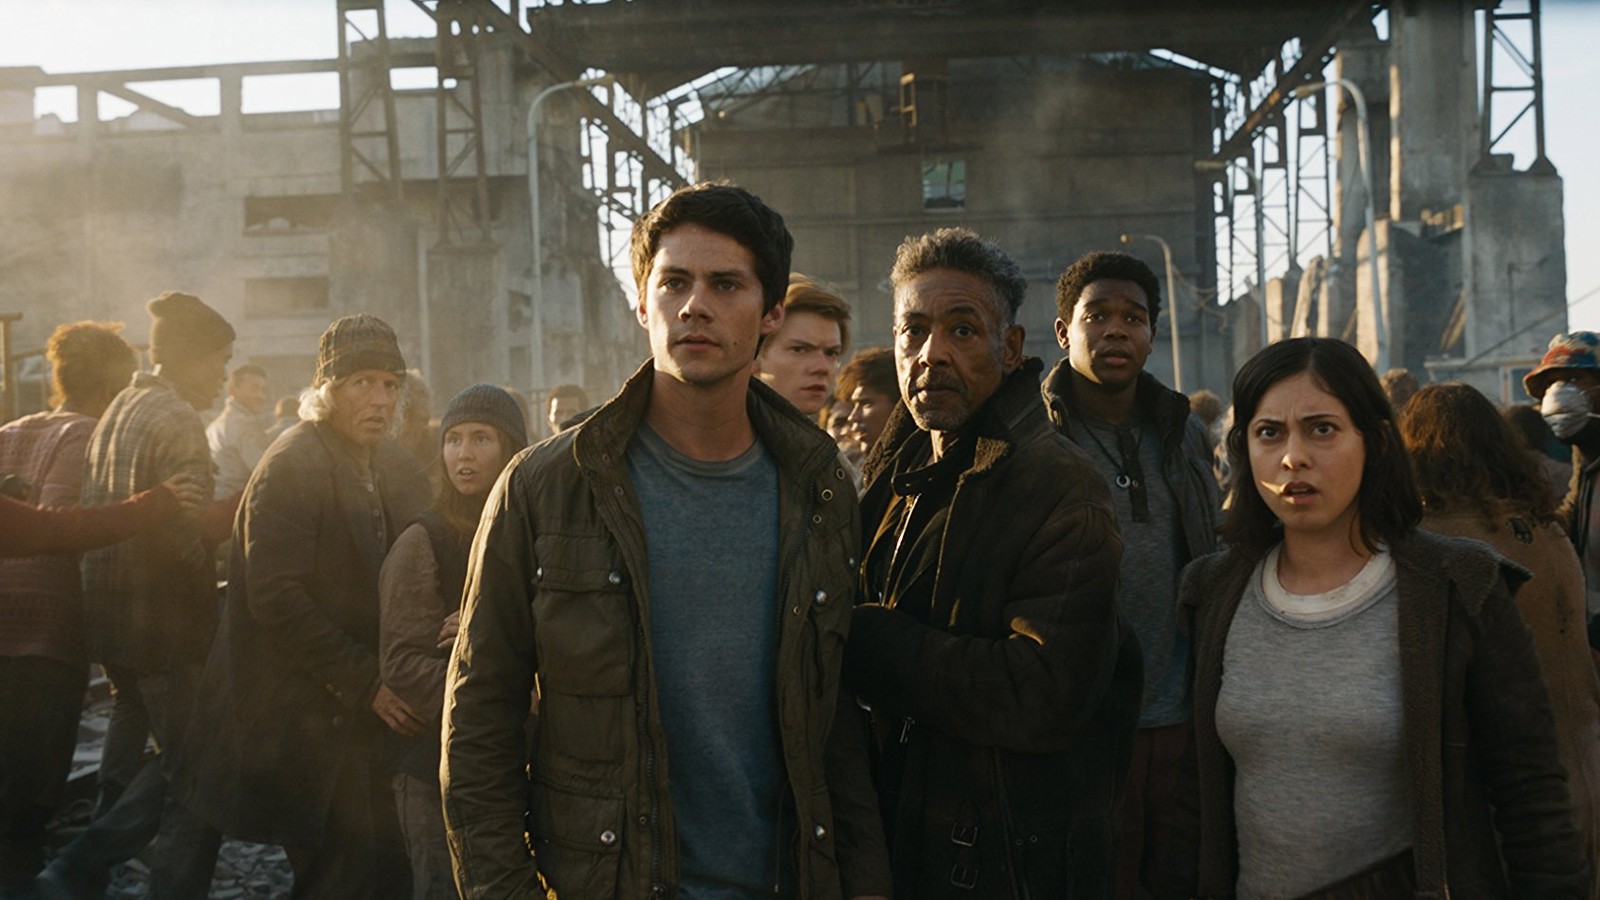 The Untold Truth Of The Maze Runner